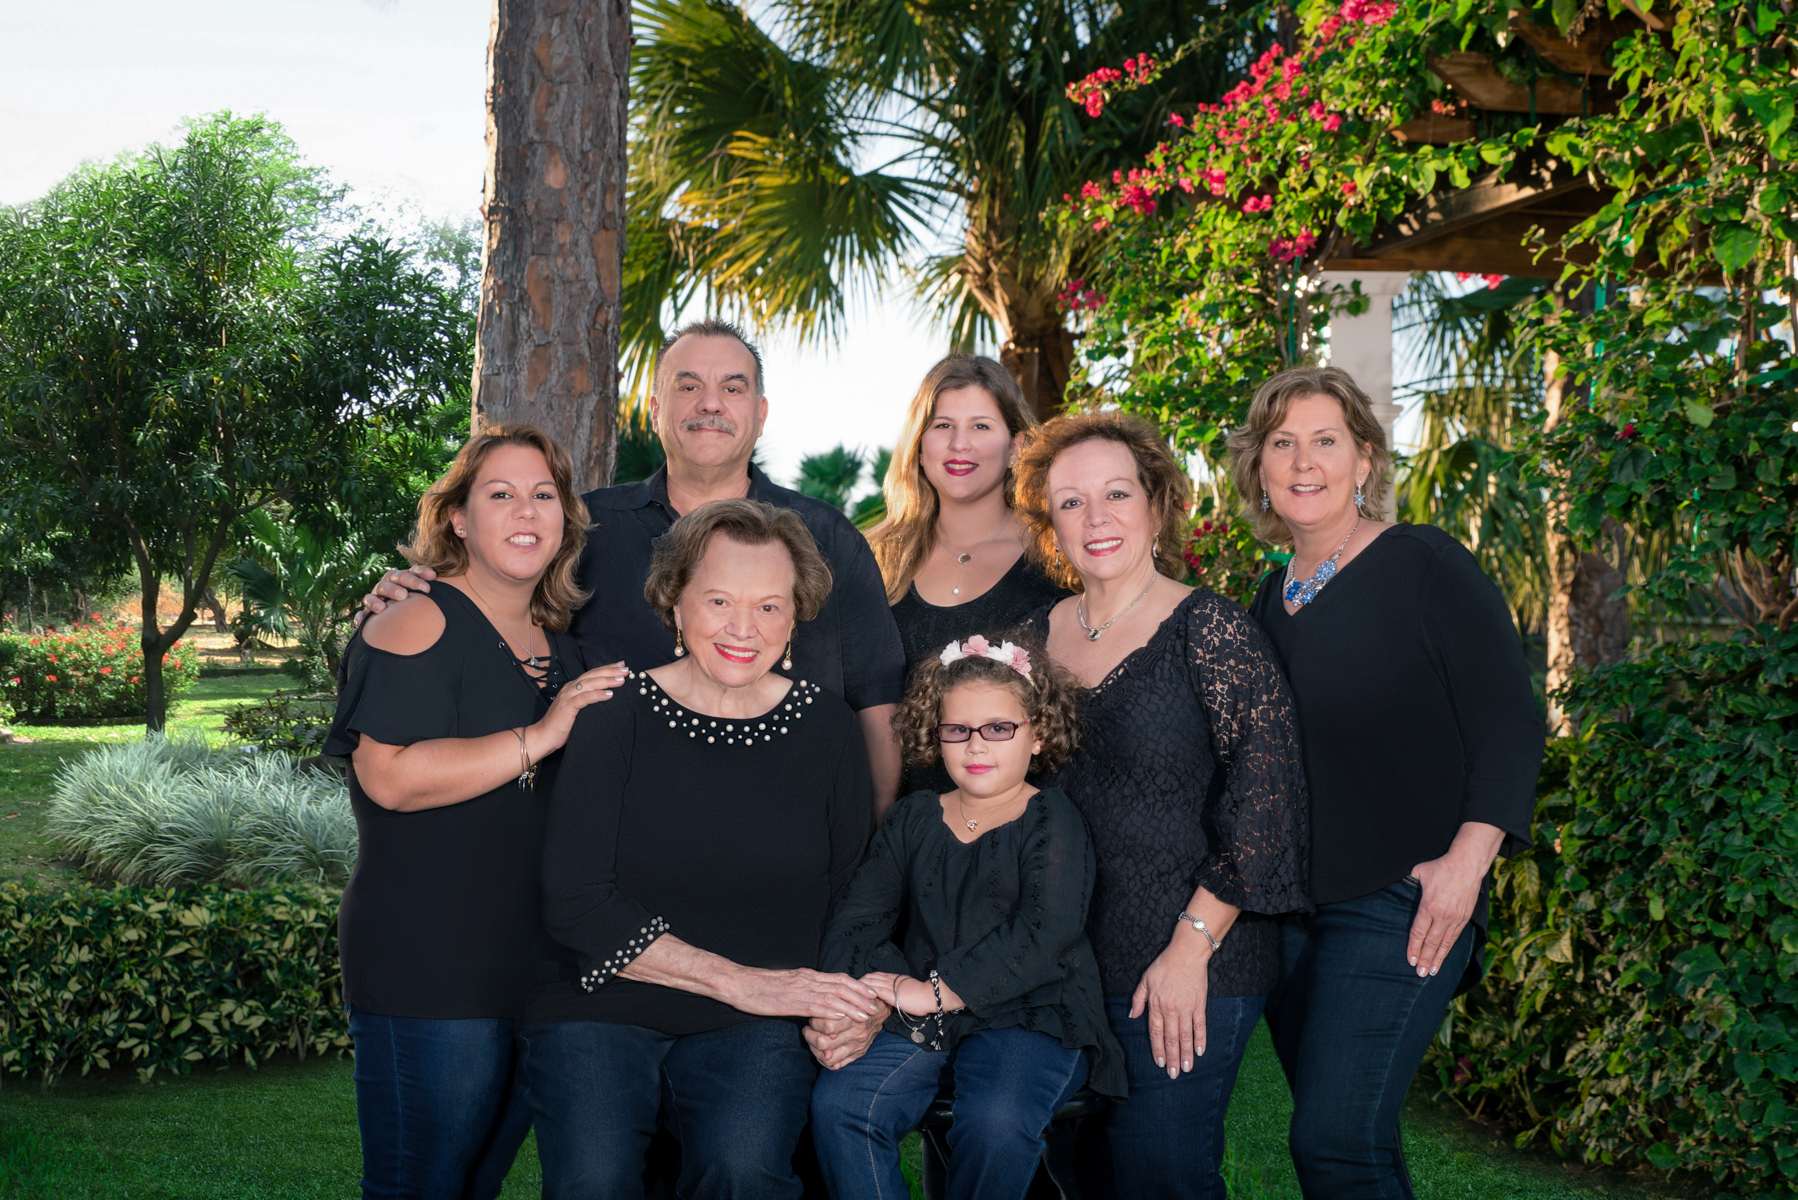 Multi-generational photos on location in Florida. Call us at 561-307-9875 to set your preferred date.